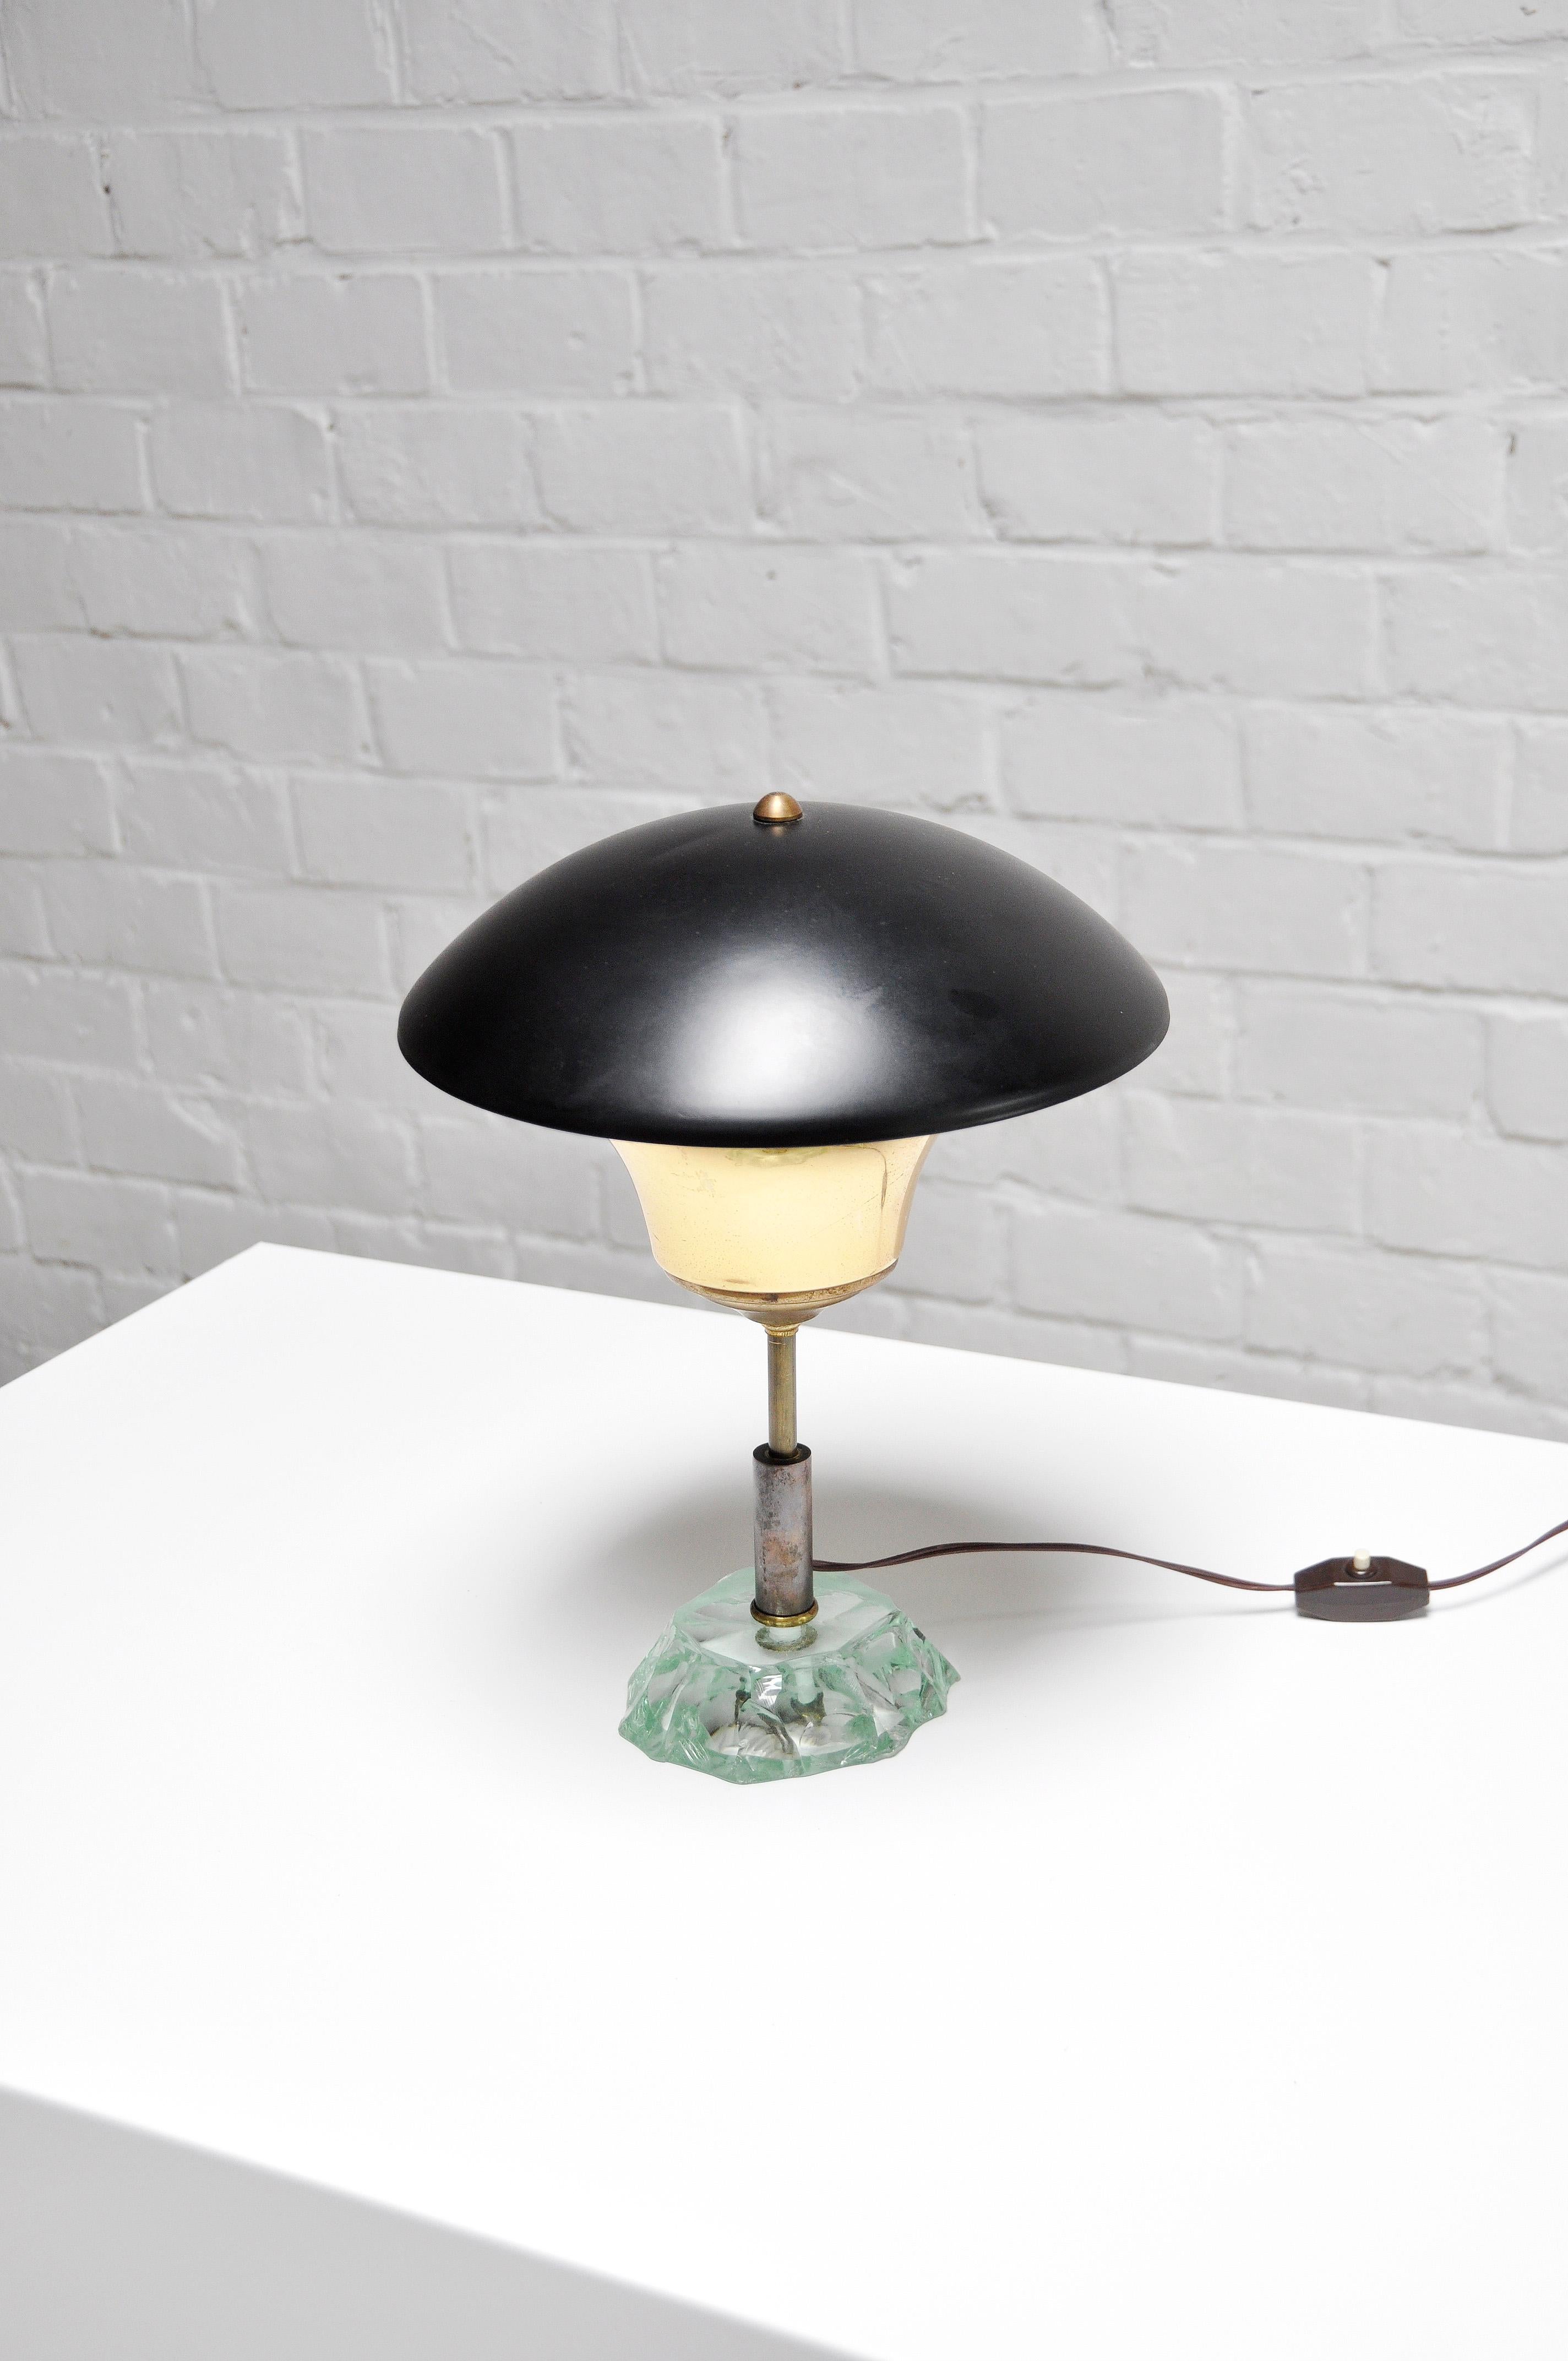 Mid-century Italian table lamp out of the 1950’s. The lamp features an adjustable swiveling mushroom shade with its original black lacquered paint. It has a beautiful thick crystal glass base. The swiveling and rotatable dome shaped lamp shade can